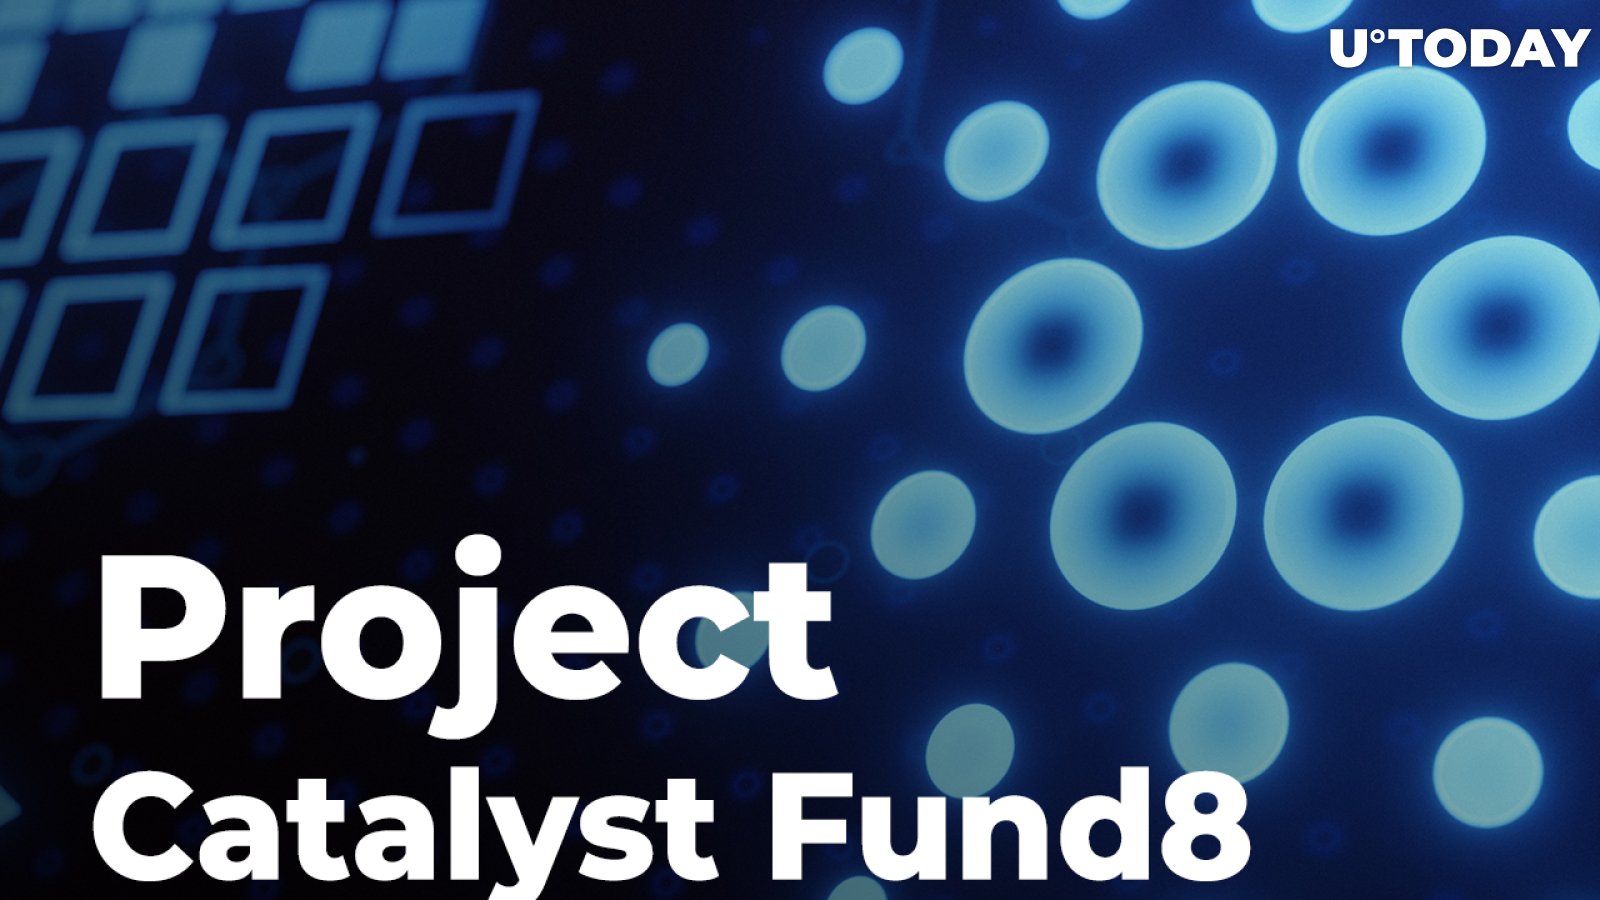 Cardano's (ADA) Project Catalyst Fund8 Voting Finally Kicks Off: What Does This Mean?